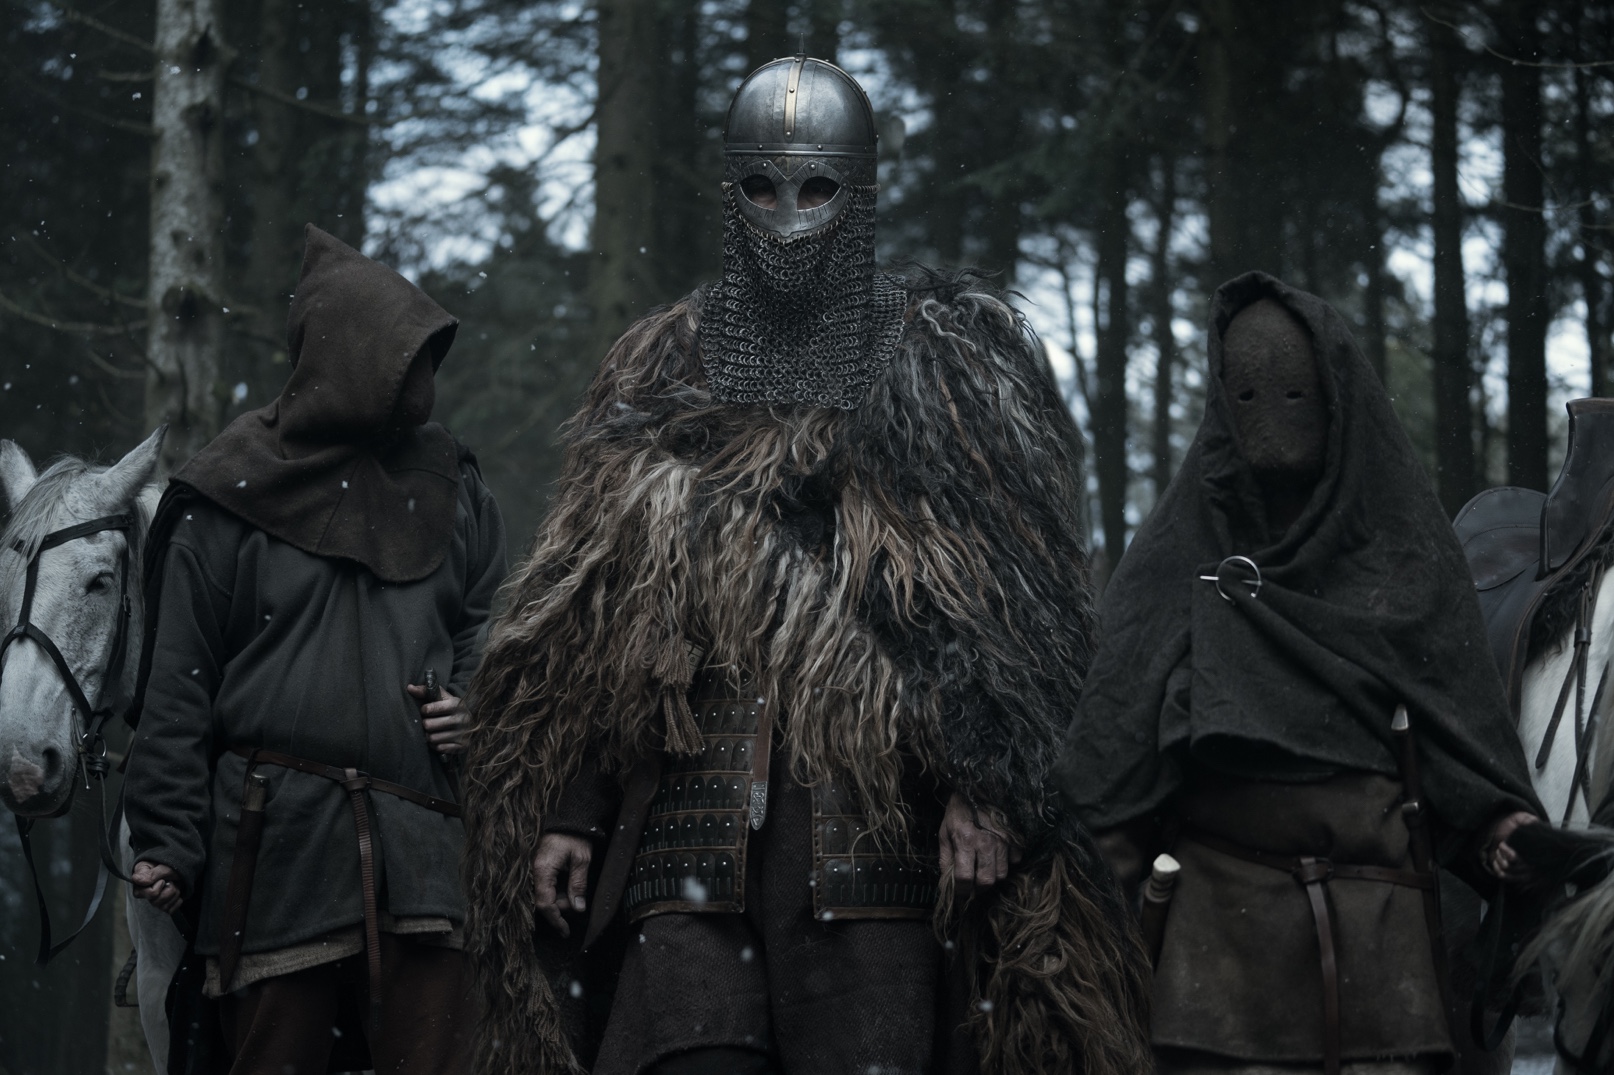 Production still from The Northman (image courtesy of Focus Features)